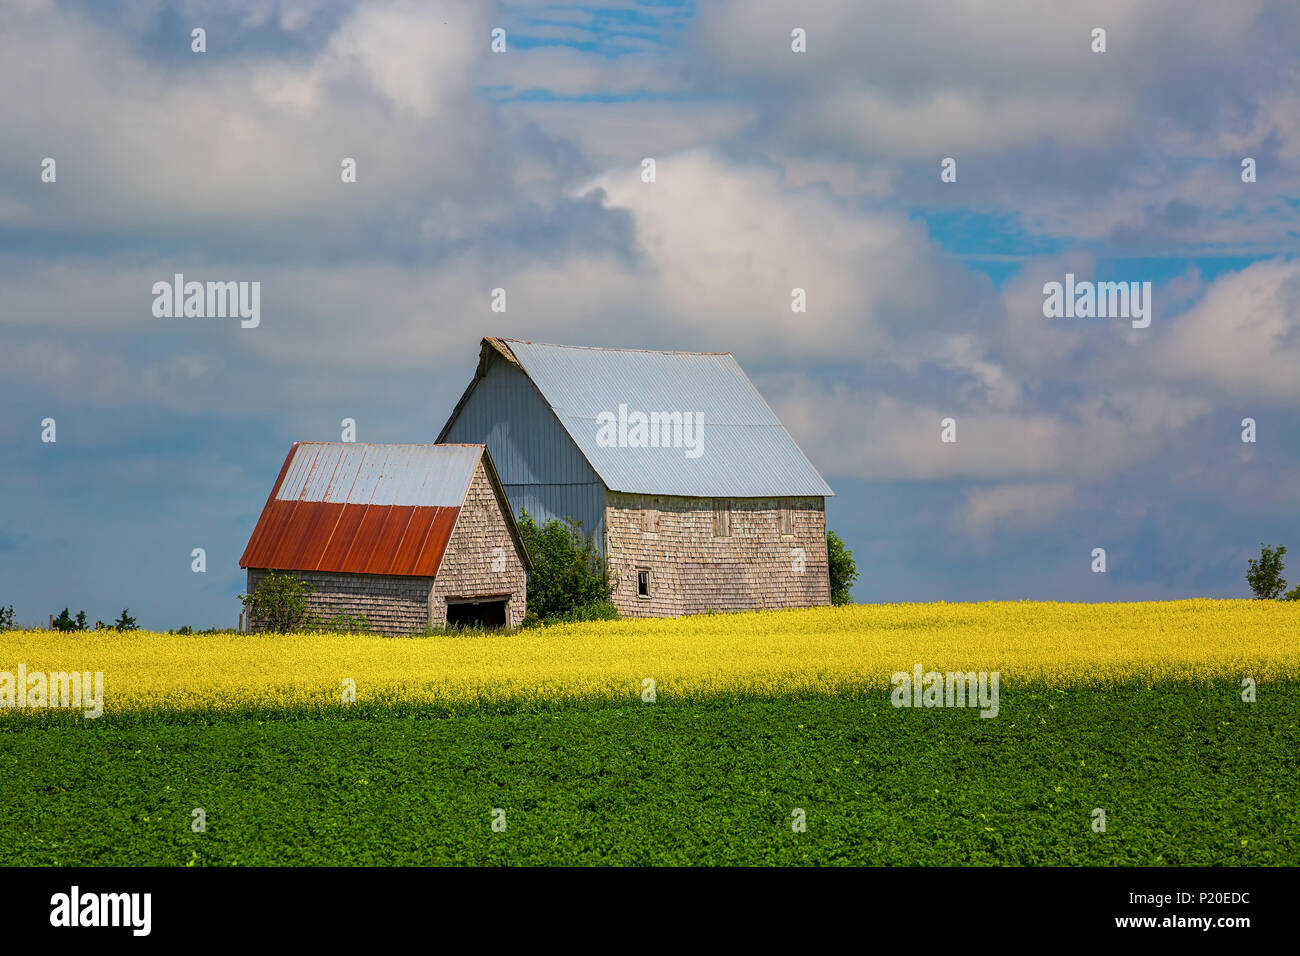 Old barns among a fields of canola and soybeans. Stock Photo